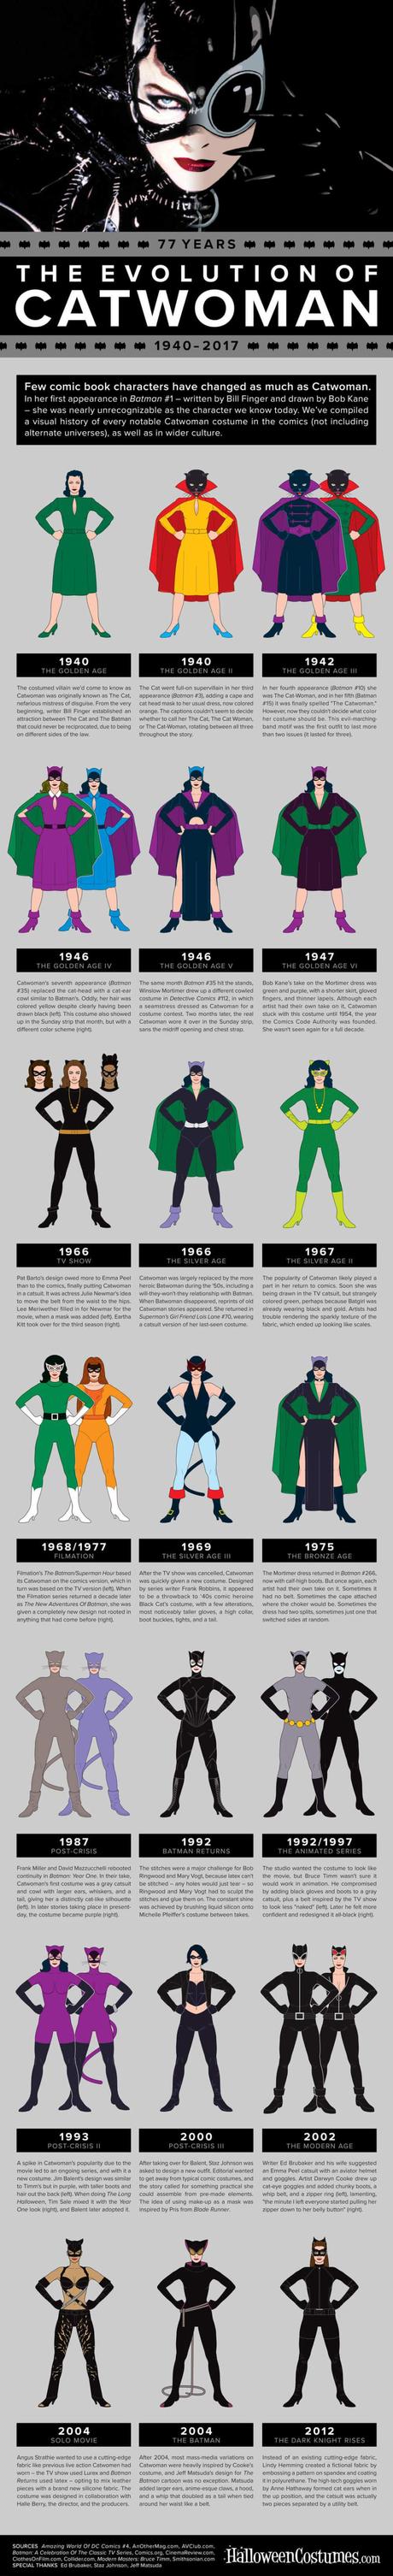 Catwoman Has Had More Costumes Over the Years Than You Probably Realize